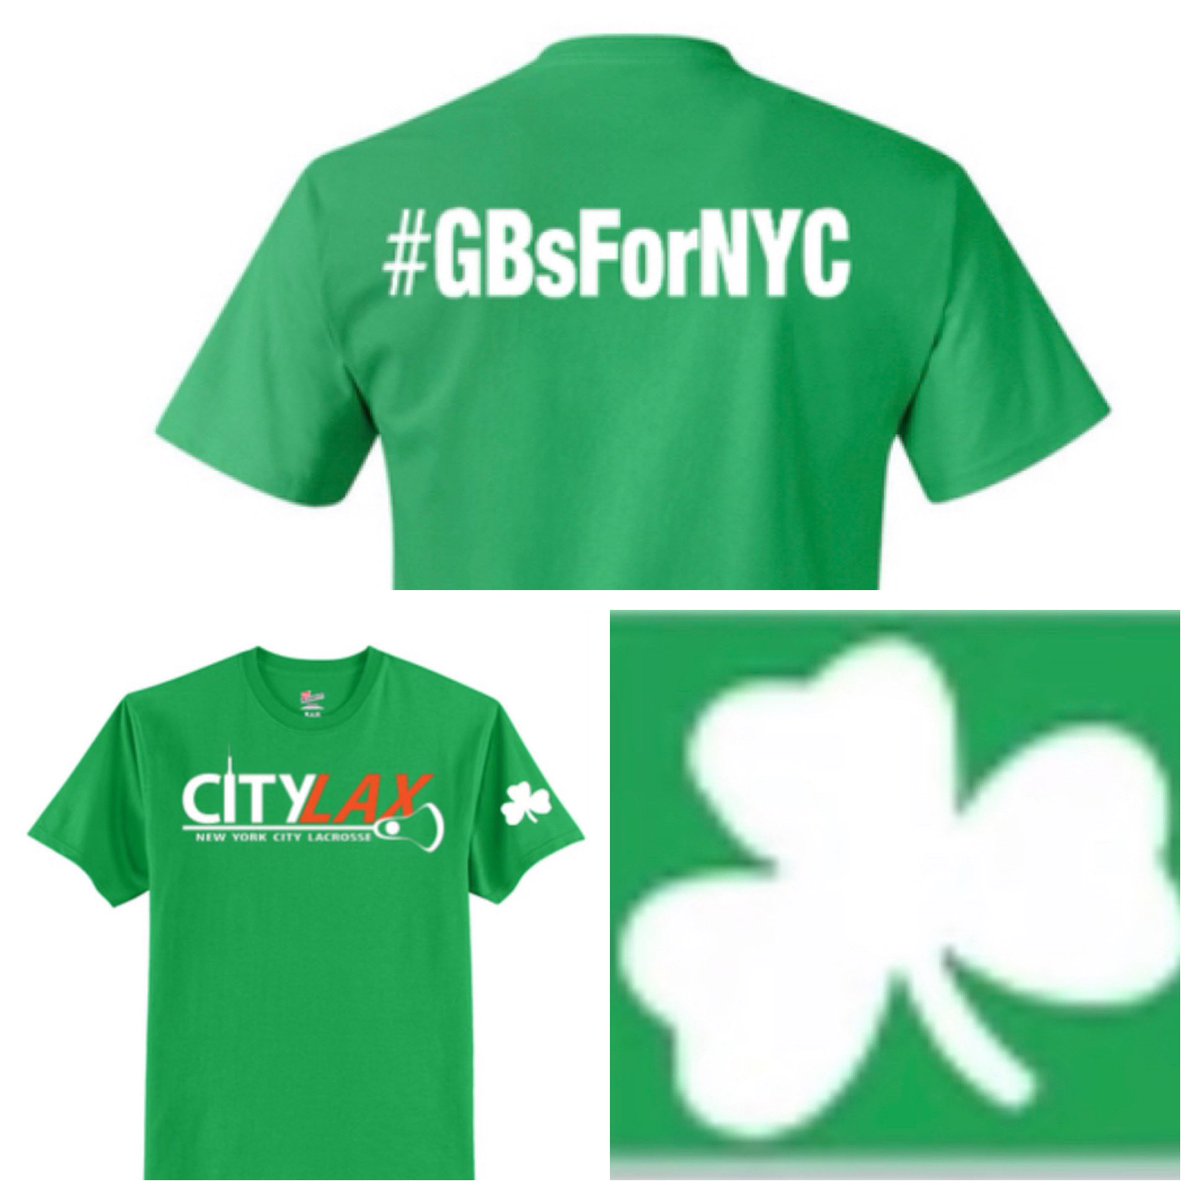 🍀🥍Fans get your limited edition #GBsforNYC t-shirt to increase awareness and raise $ for Pat & Chris Kavanagh’s ground ball initiative to benefit @CityLaxNYC It’s the perfect shirt to make Arlotta Stadium look the Chicago River on St Patrick’s Day
citylaxtshirtspring2024.itemorder.com/shop/product/3…